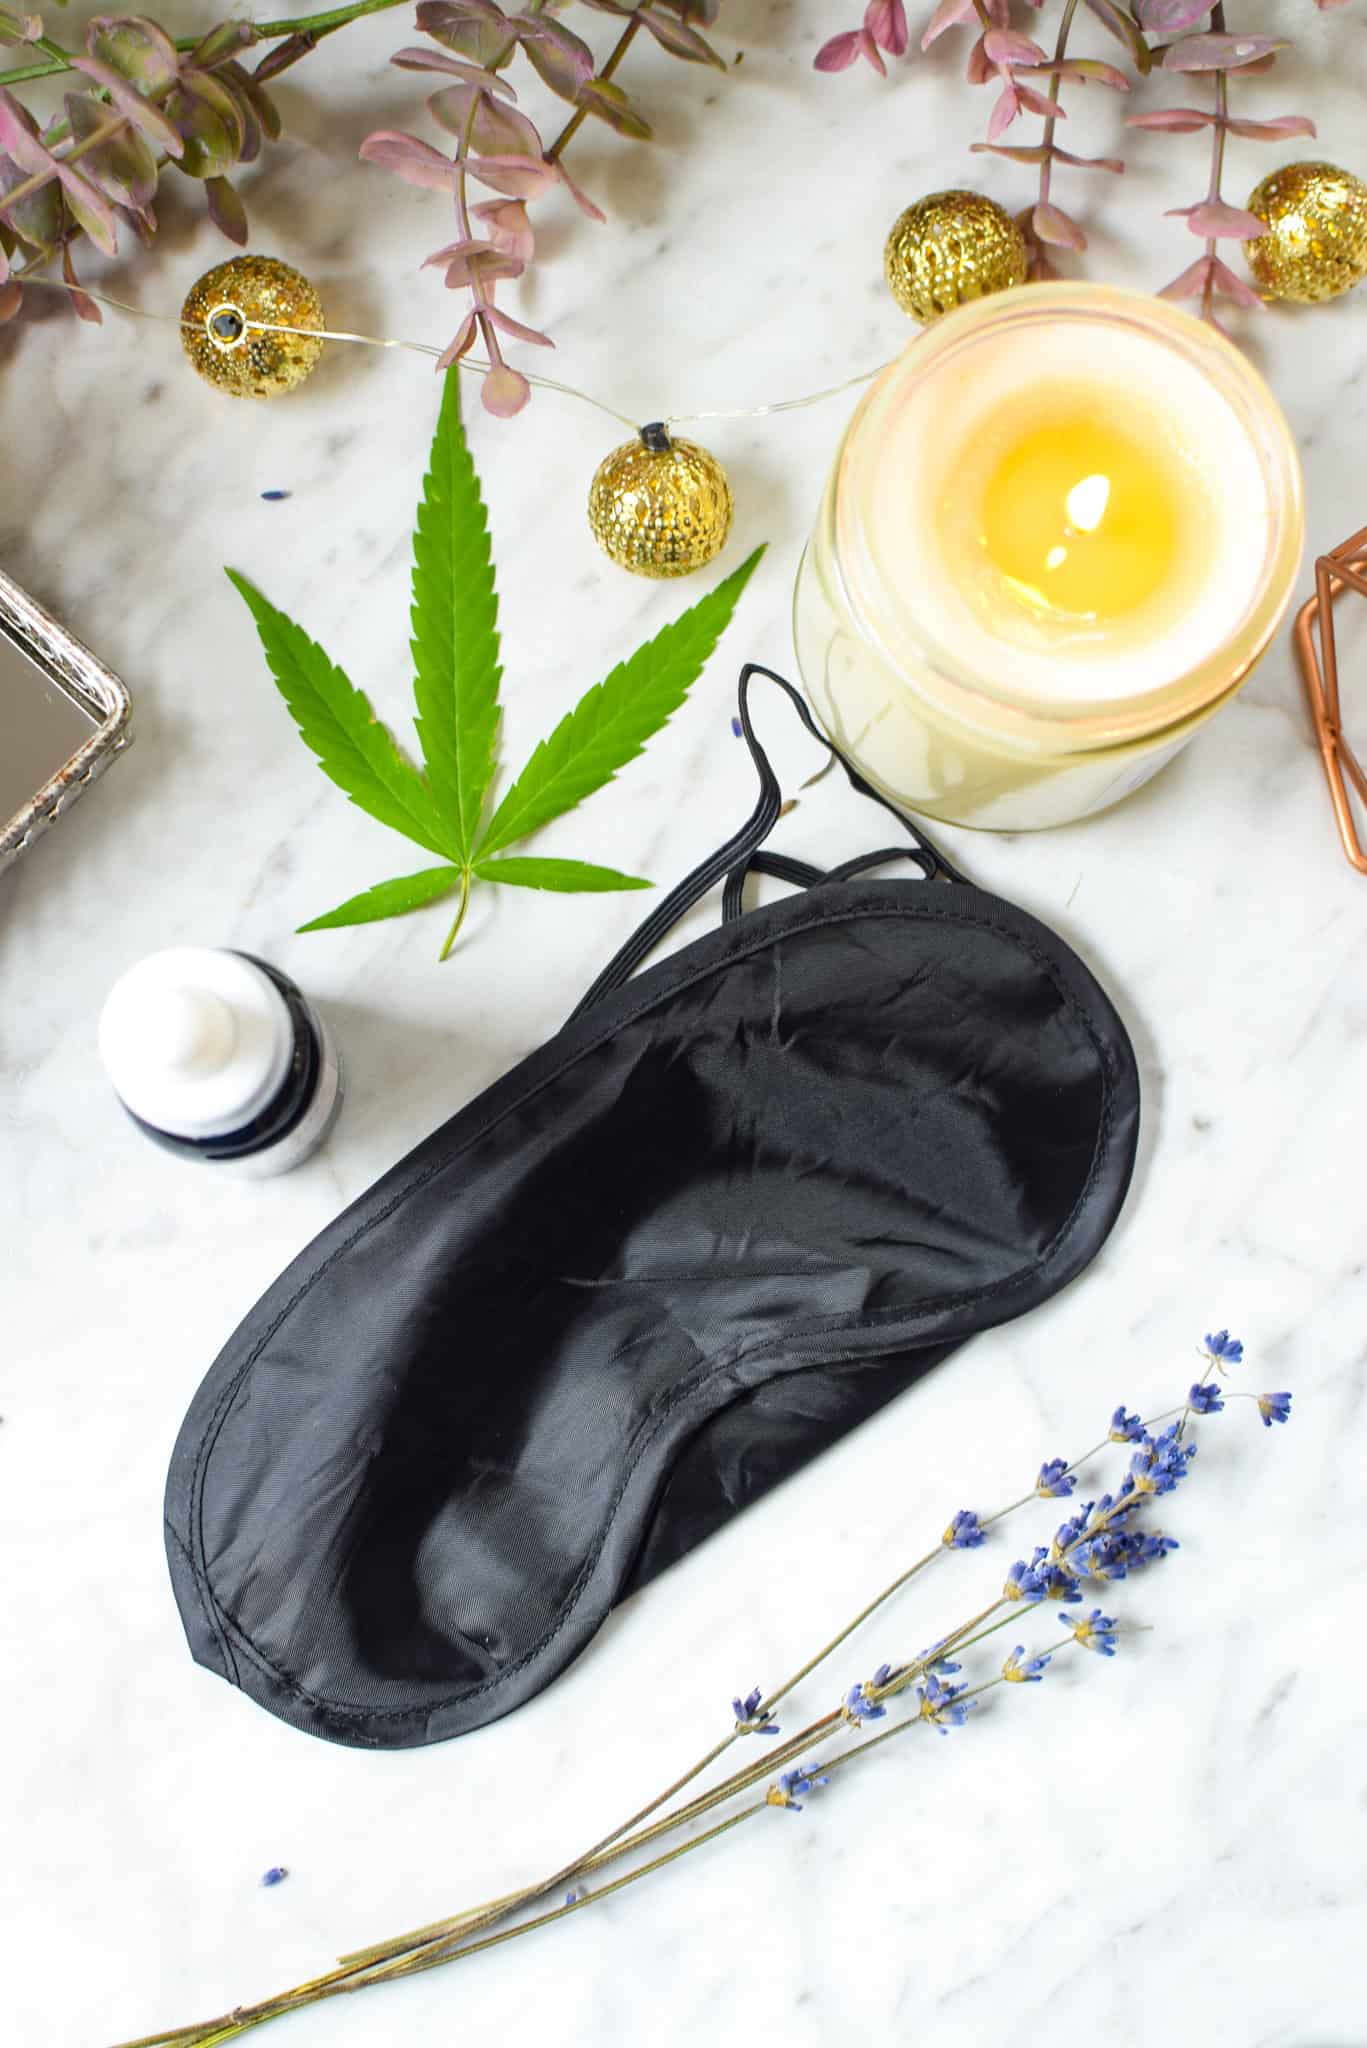 A picture of cannabis items for sleep and relaxation.